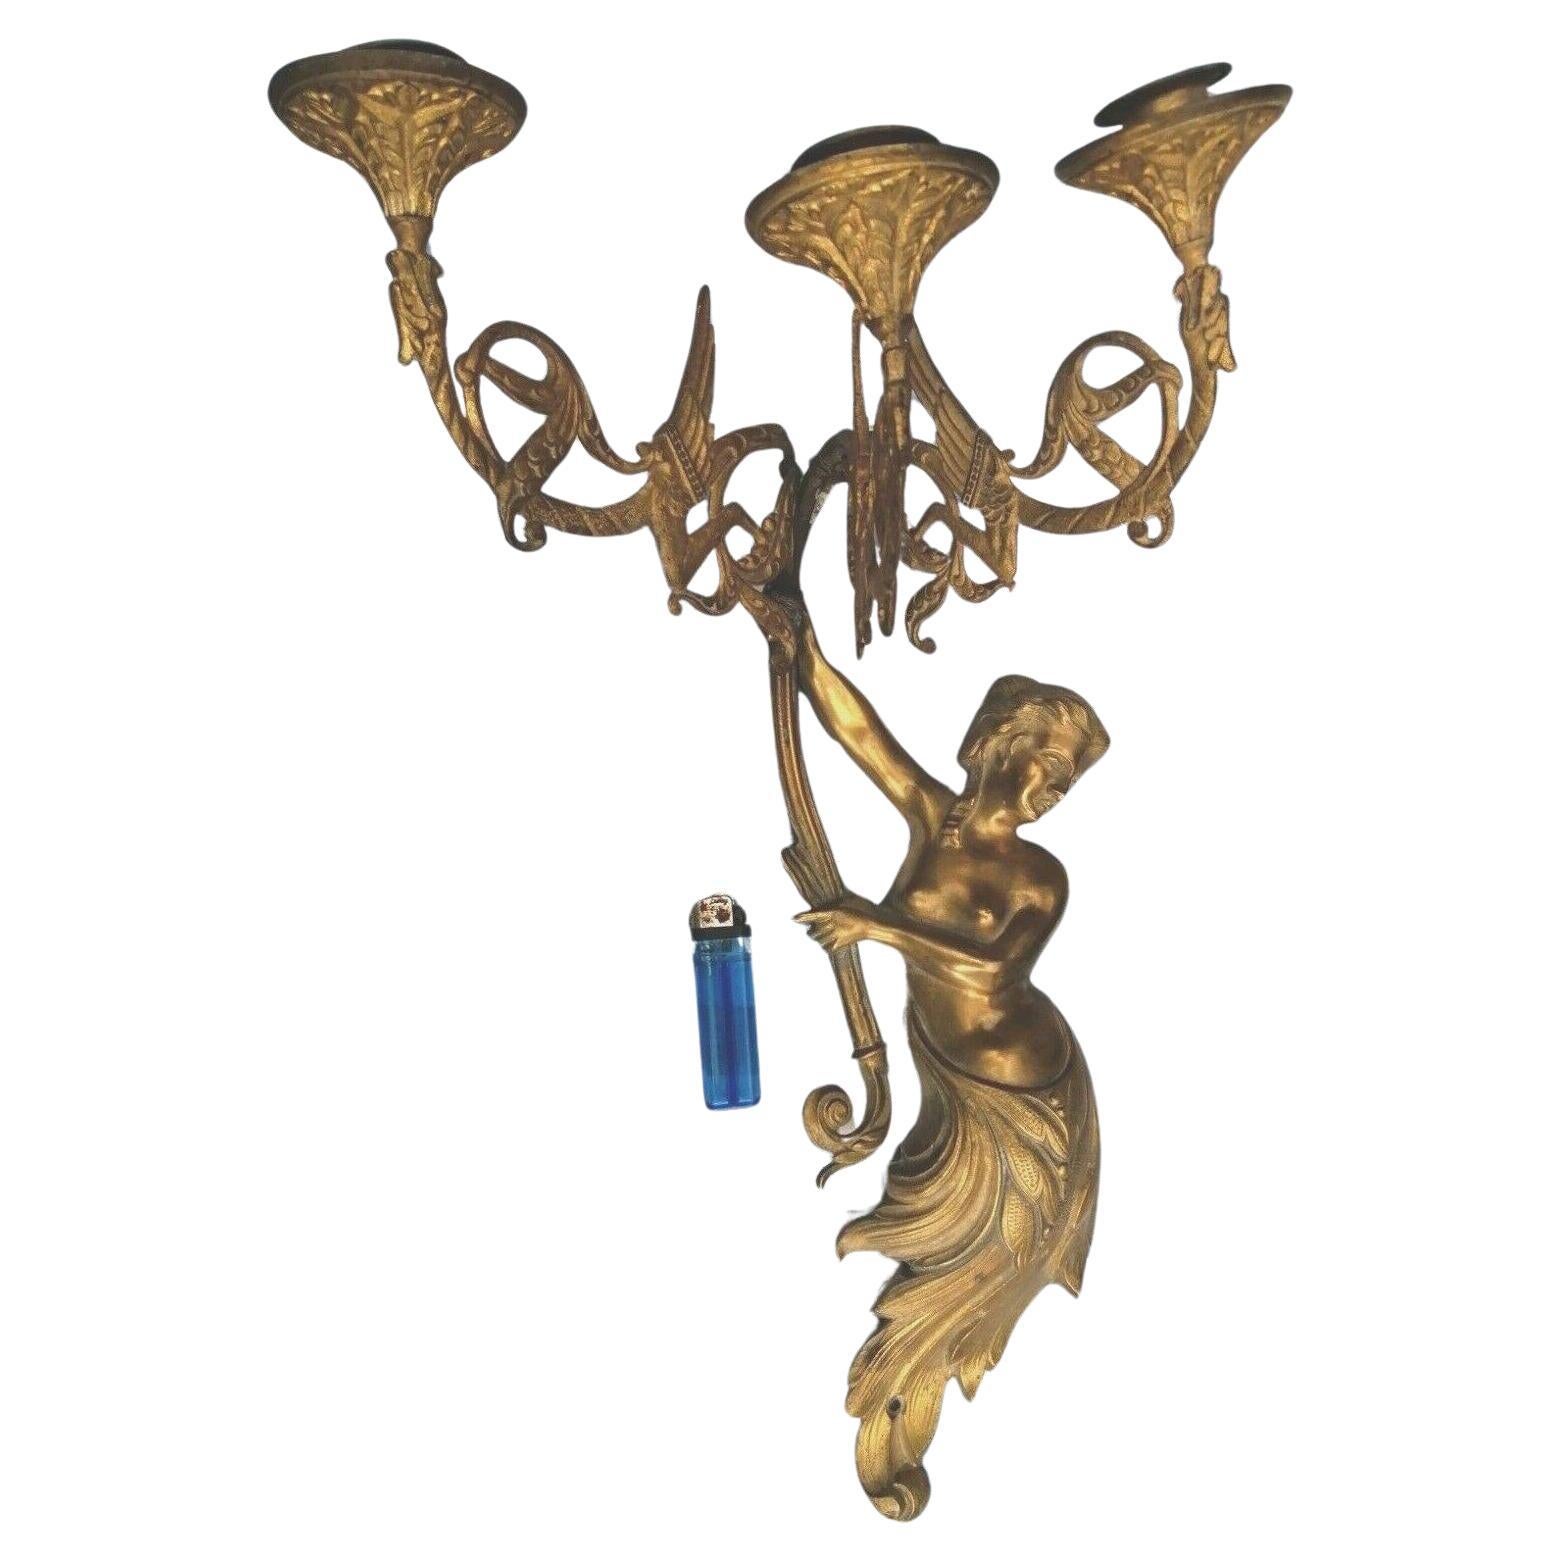 1920s French Art Deco Bronze Mermaid Wi/ Sea Serpents Wall Sconce after Guillema For Sale